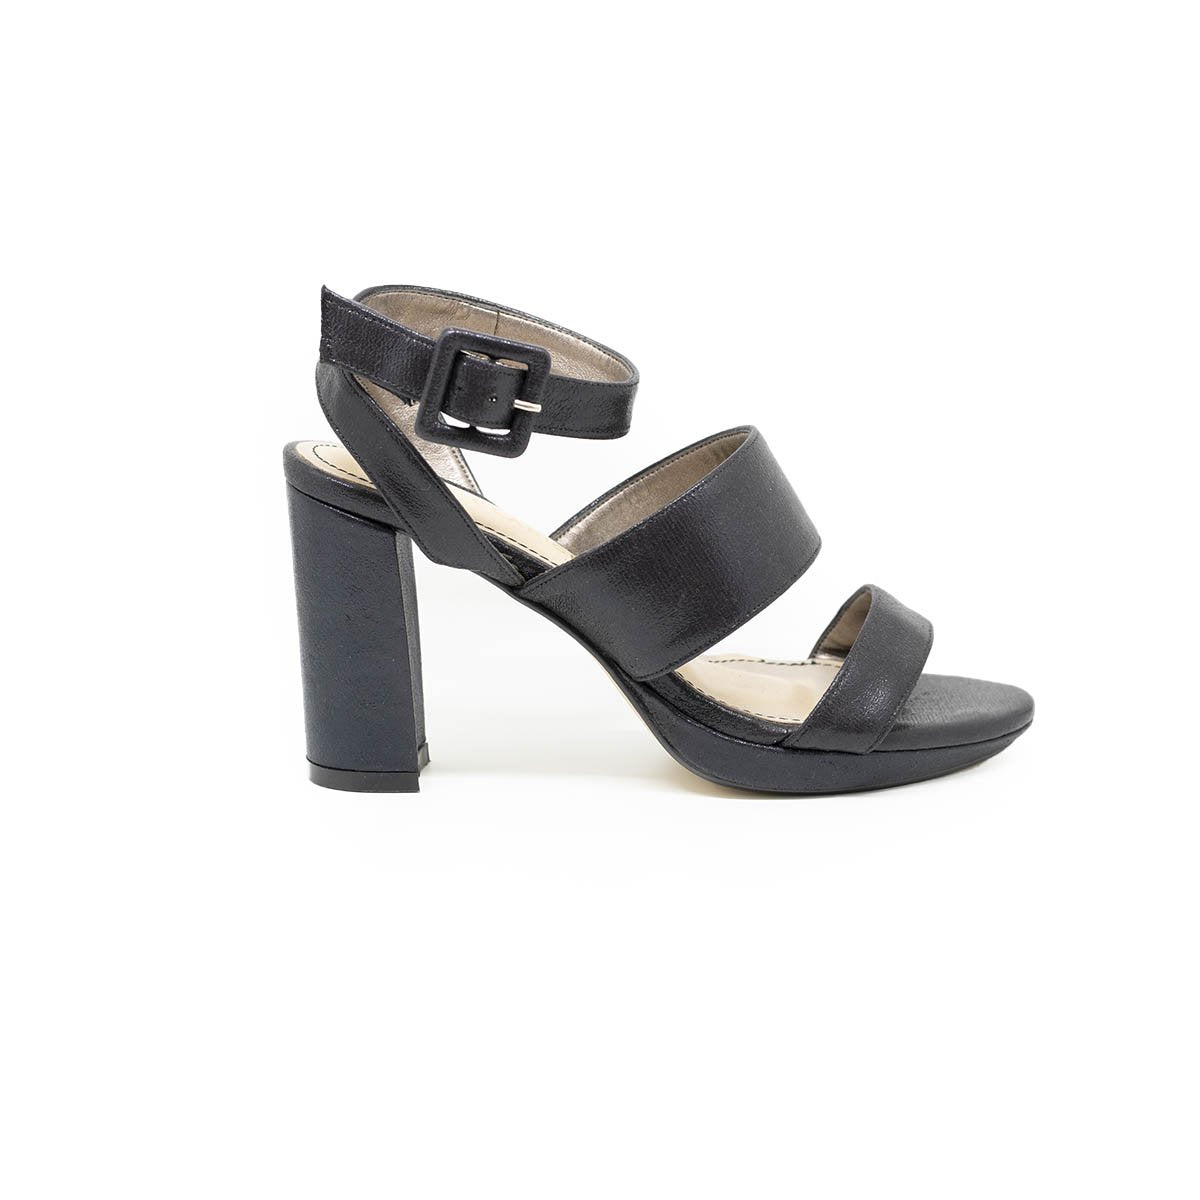 Clarice Brianne BRIANNE - Clearance Shoes Black Shimmer / 5 / 36  Available at Illusions Lingerie